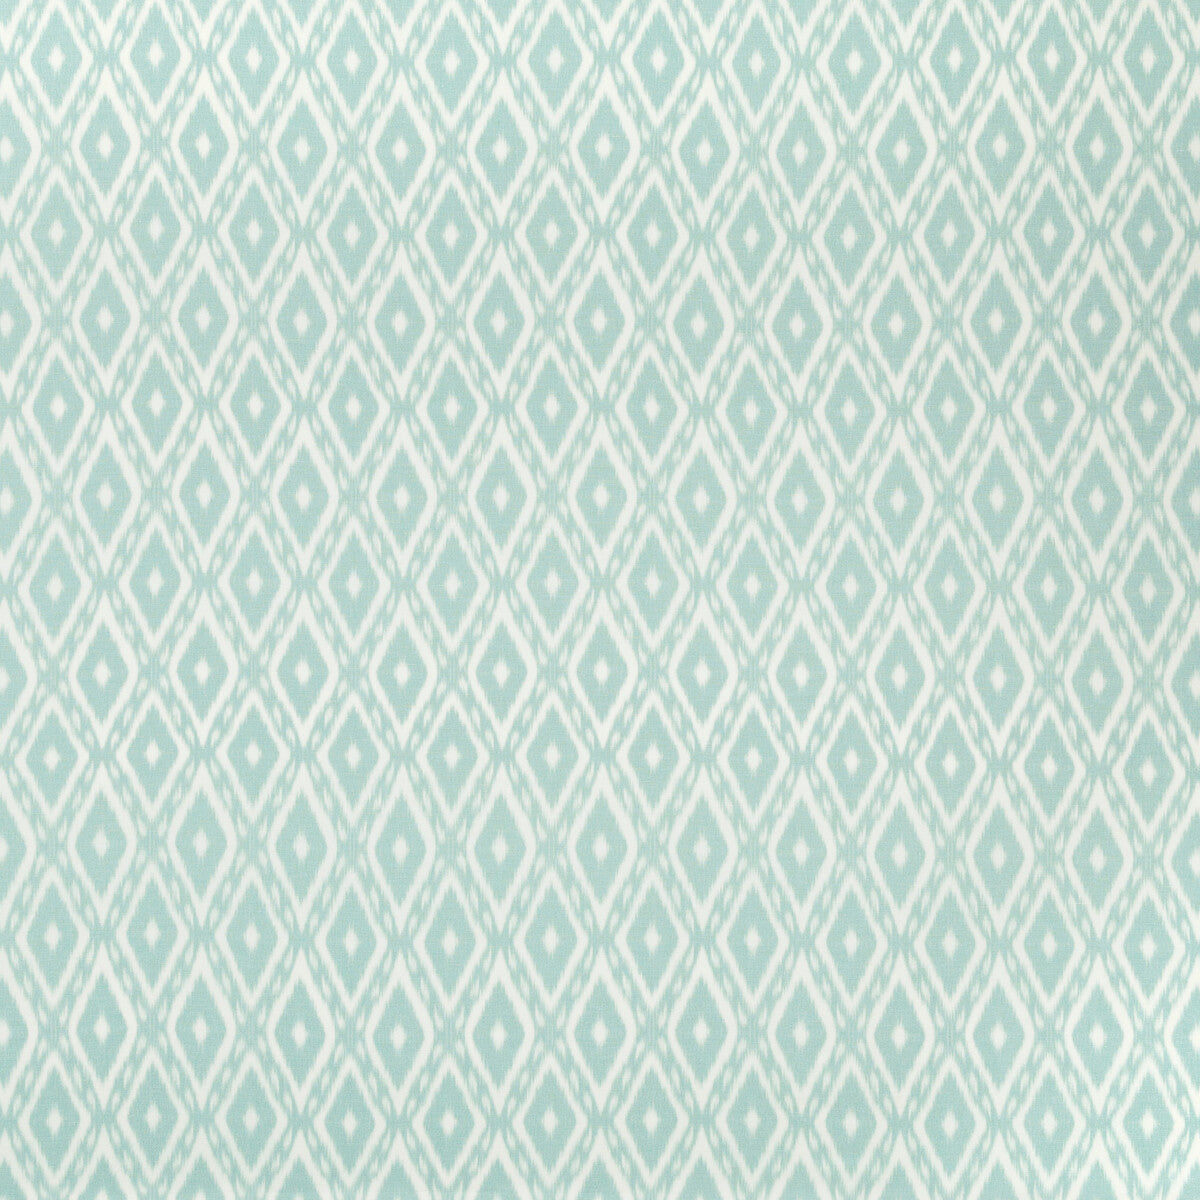 Bartow Print fabric in aqua color - pattern 2020182.13.0 - by Lee Jofa in the Avondale collection